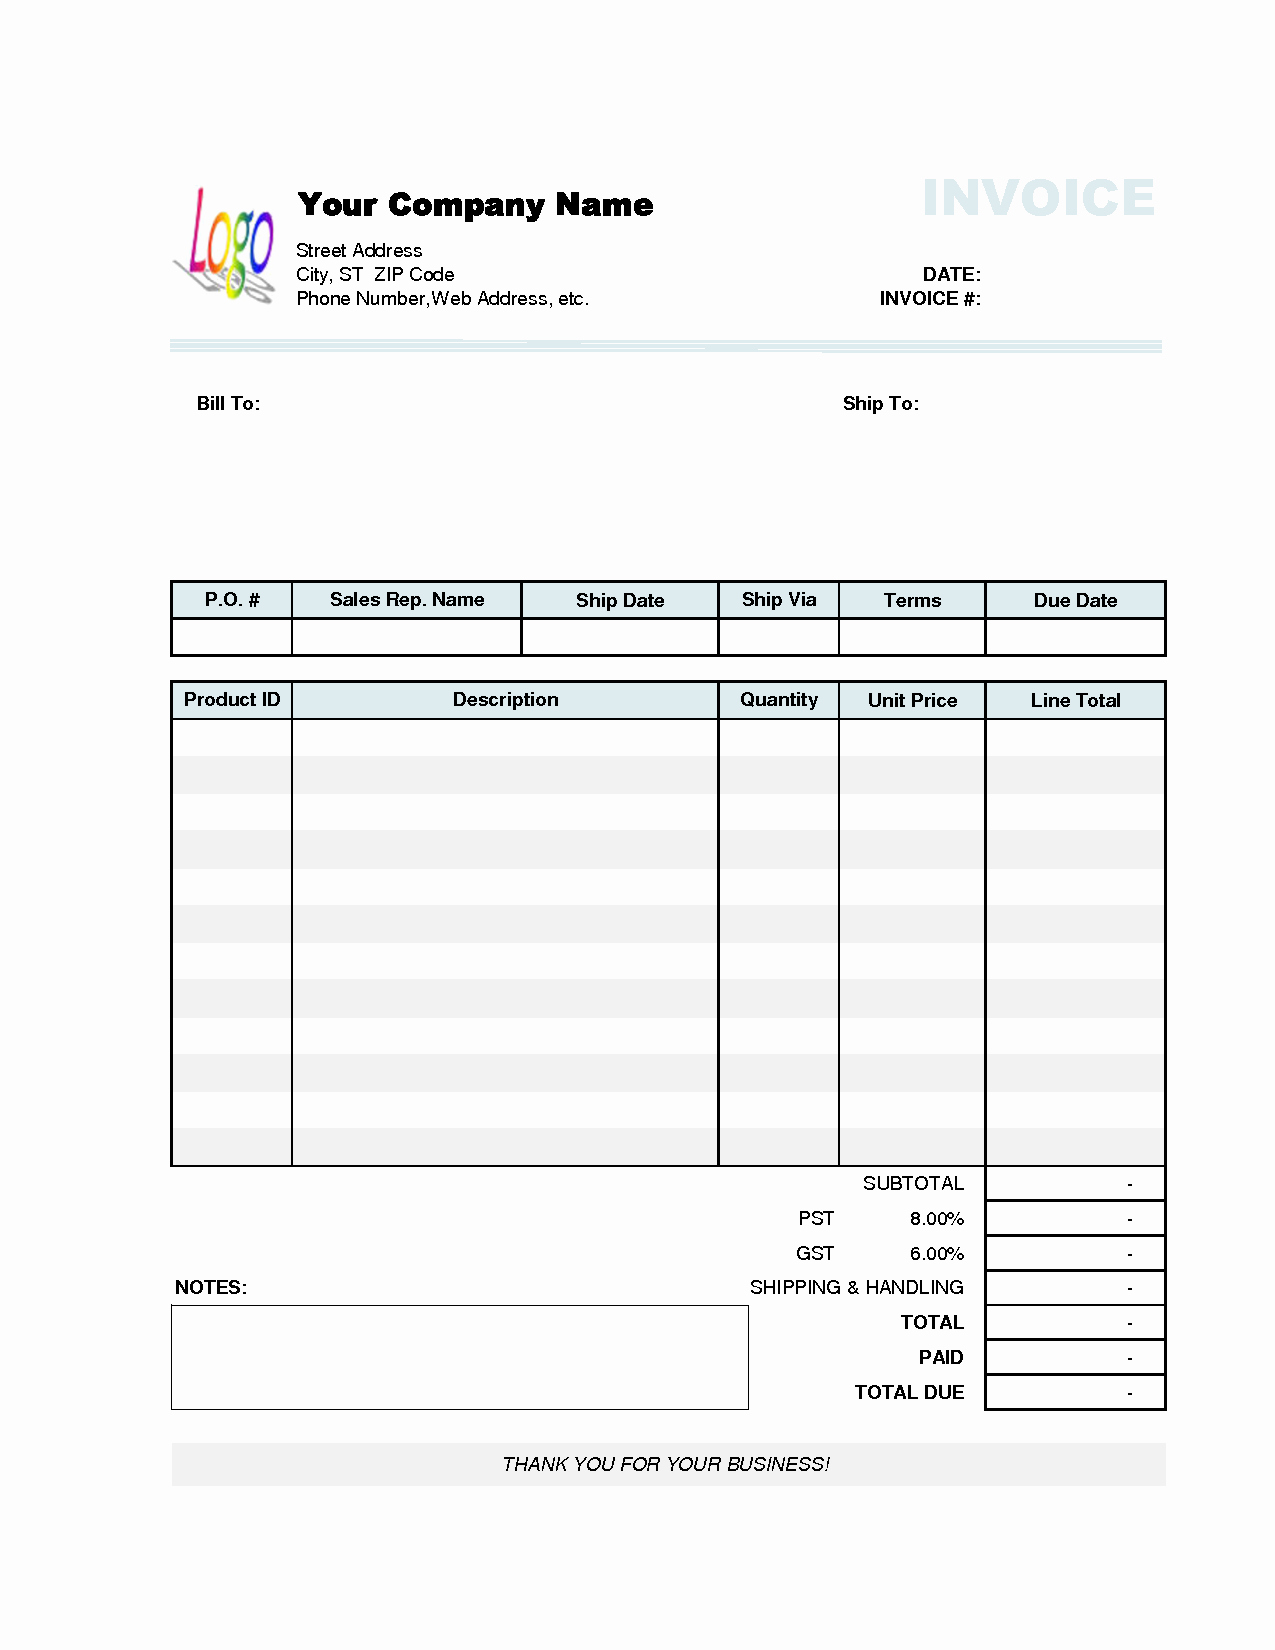 Excel Invoice Template Free Download New Invoice Template Excel 2010